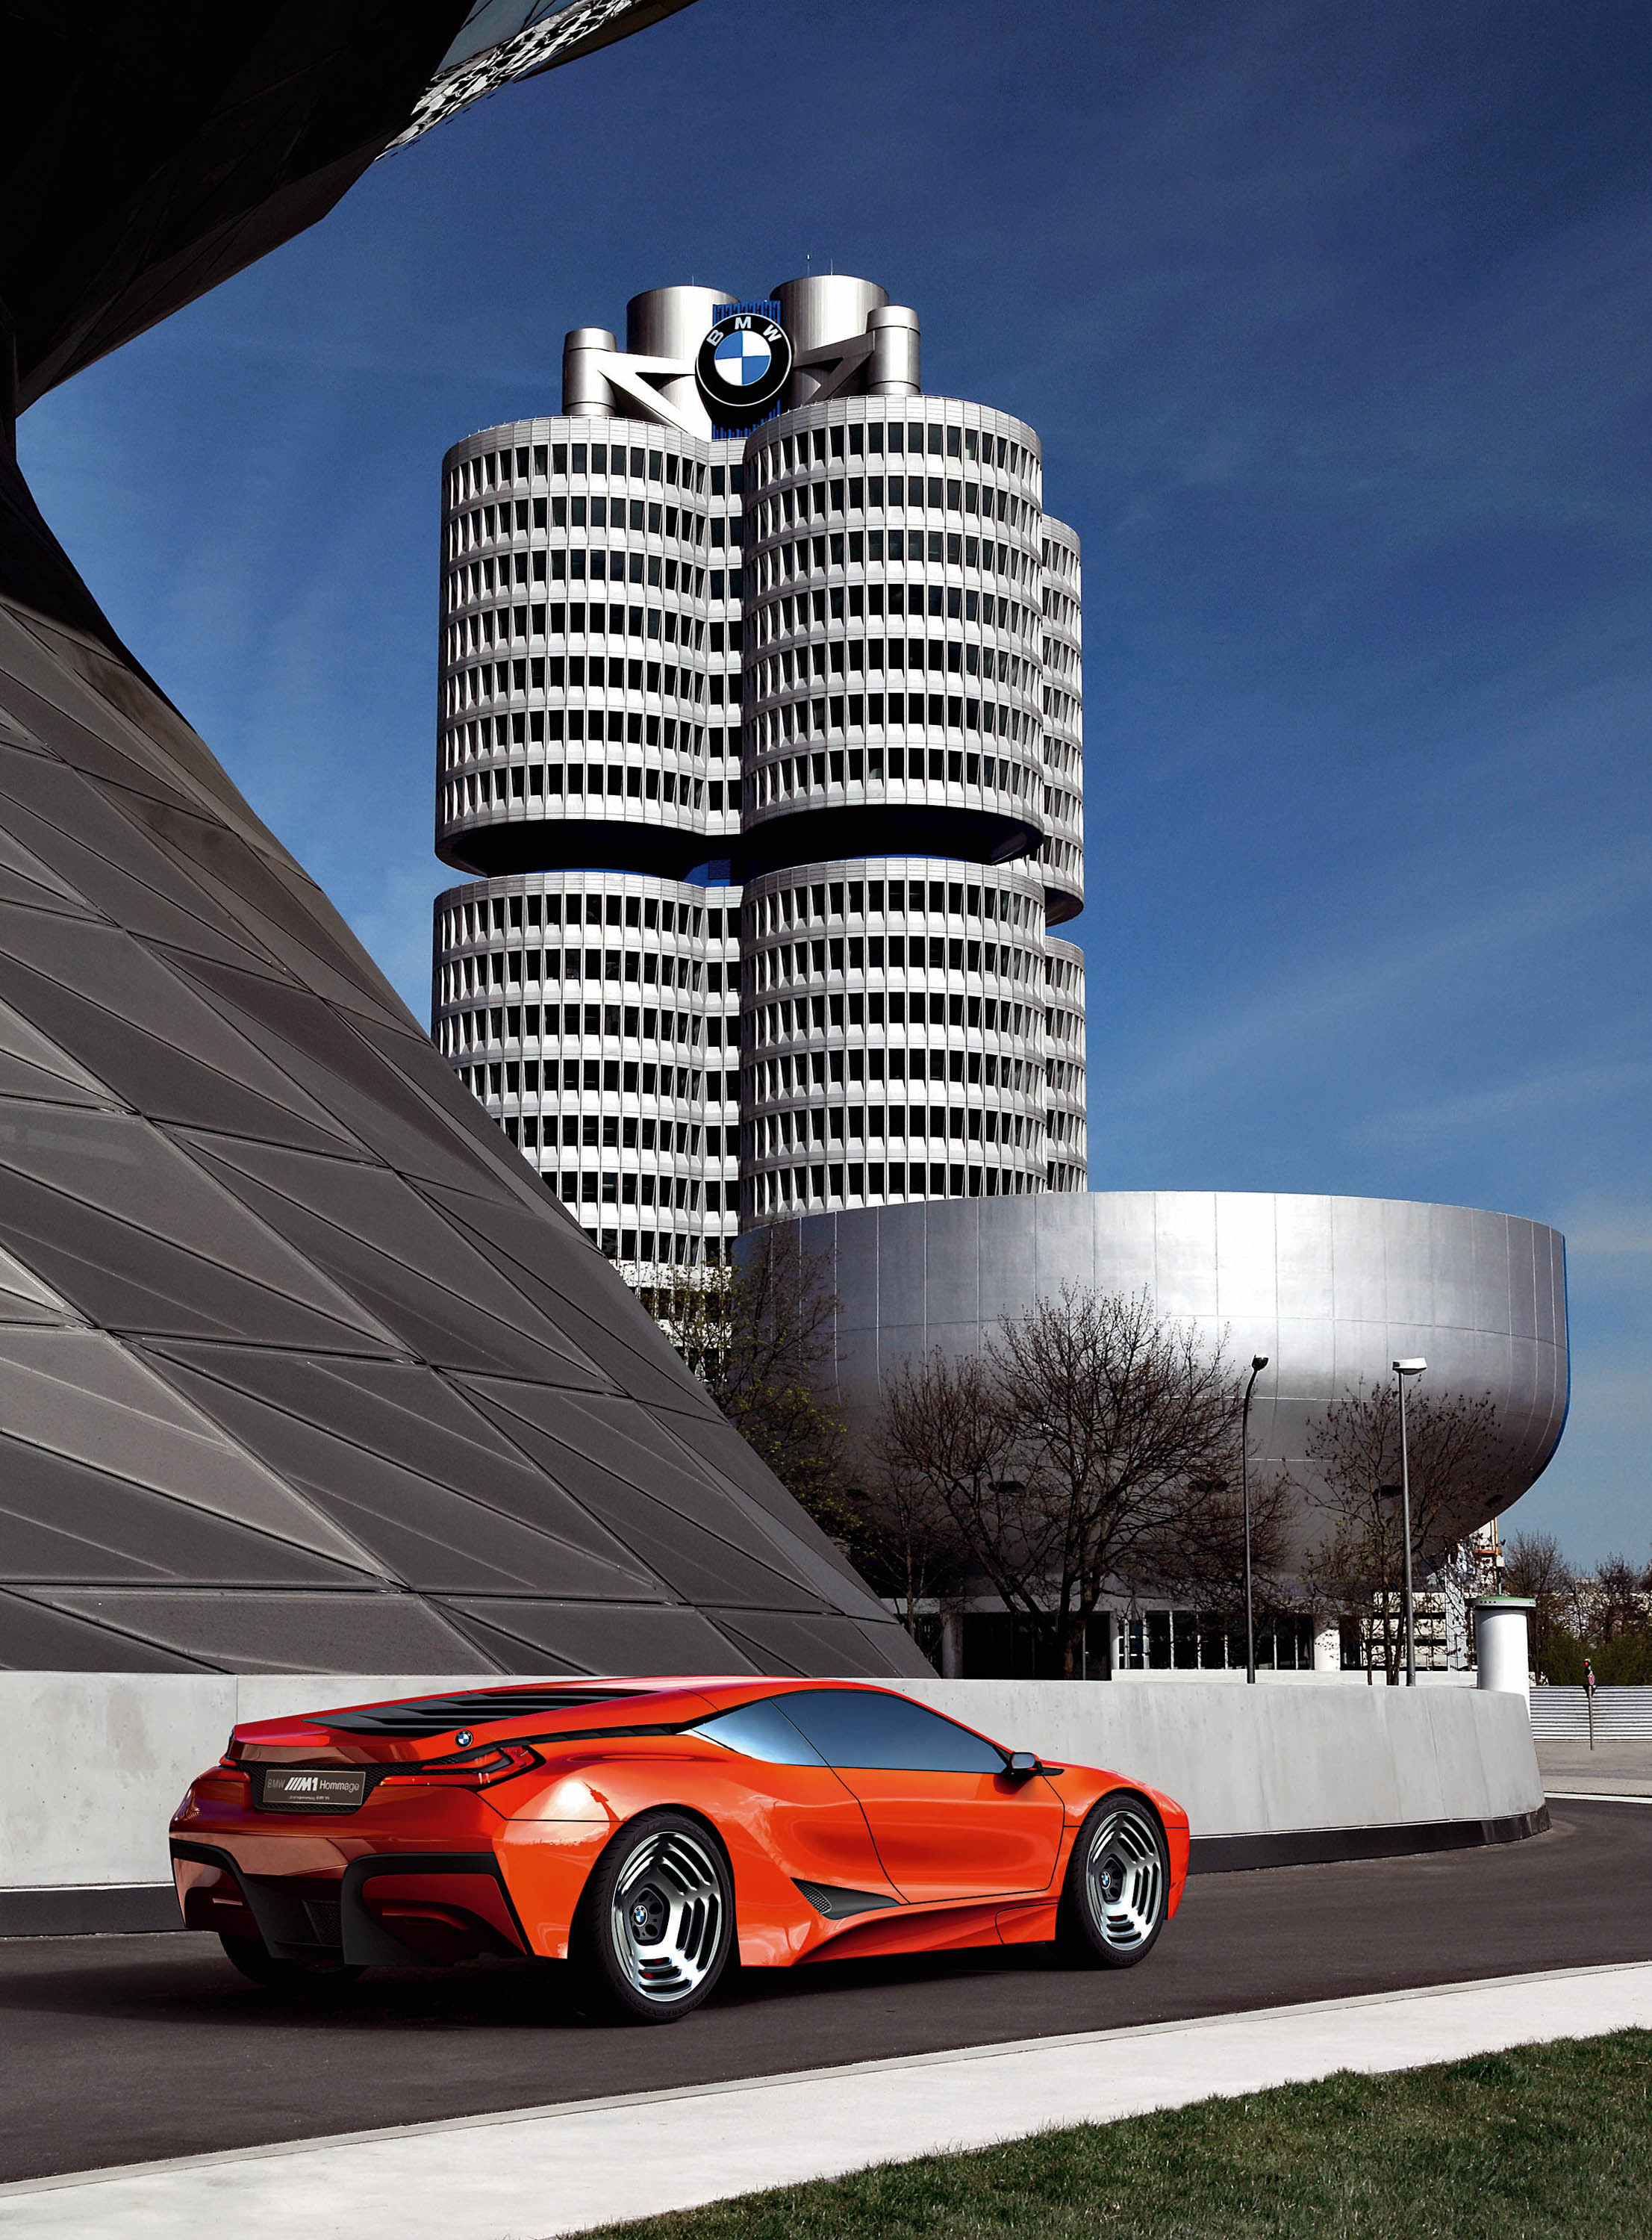  Wallpapers on Bmw Concept Cars Hd Wallpaper   Cars   Trucks   636484